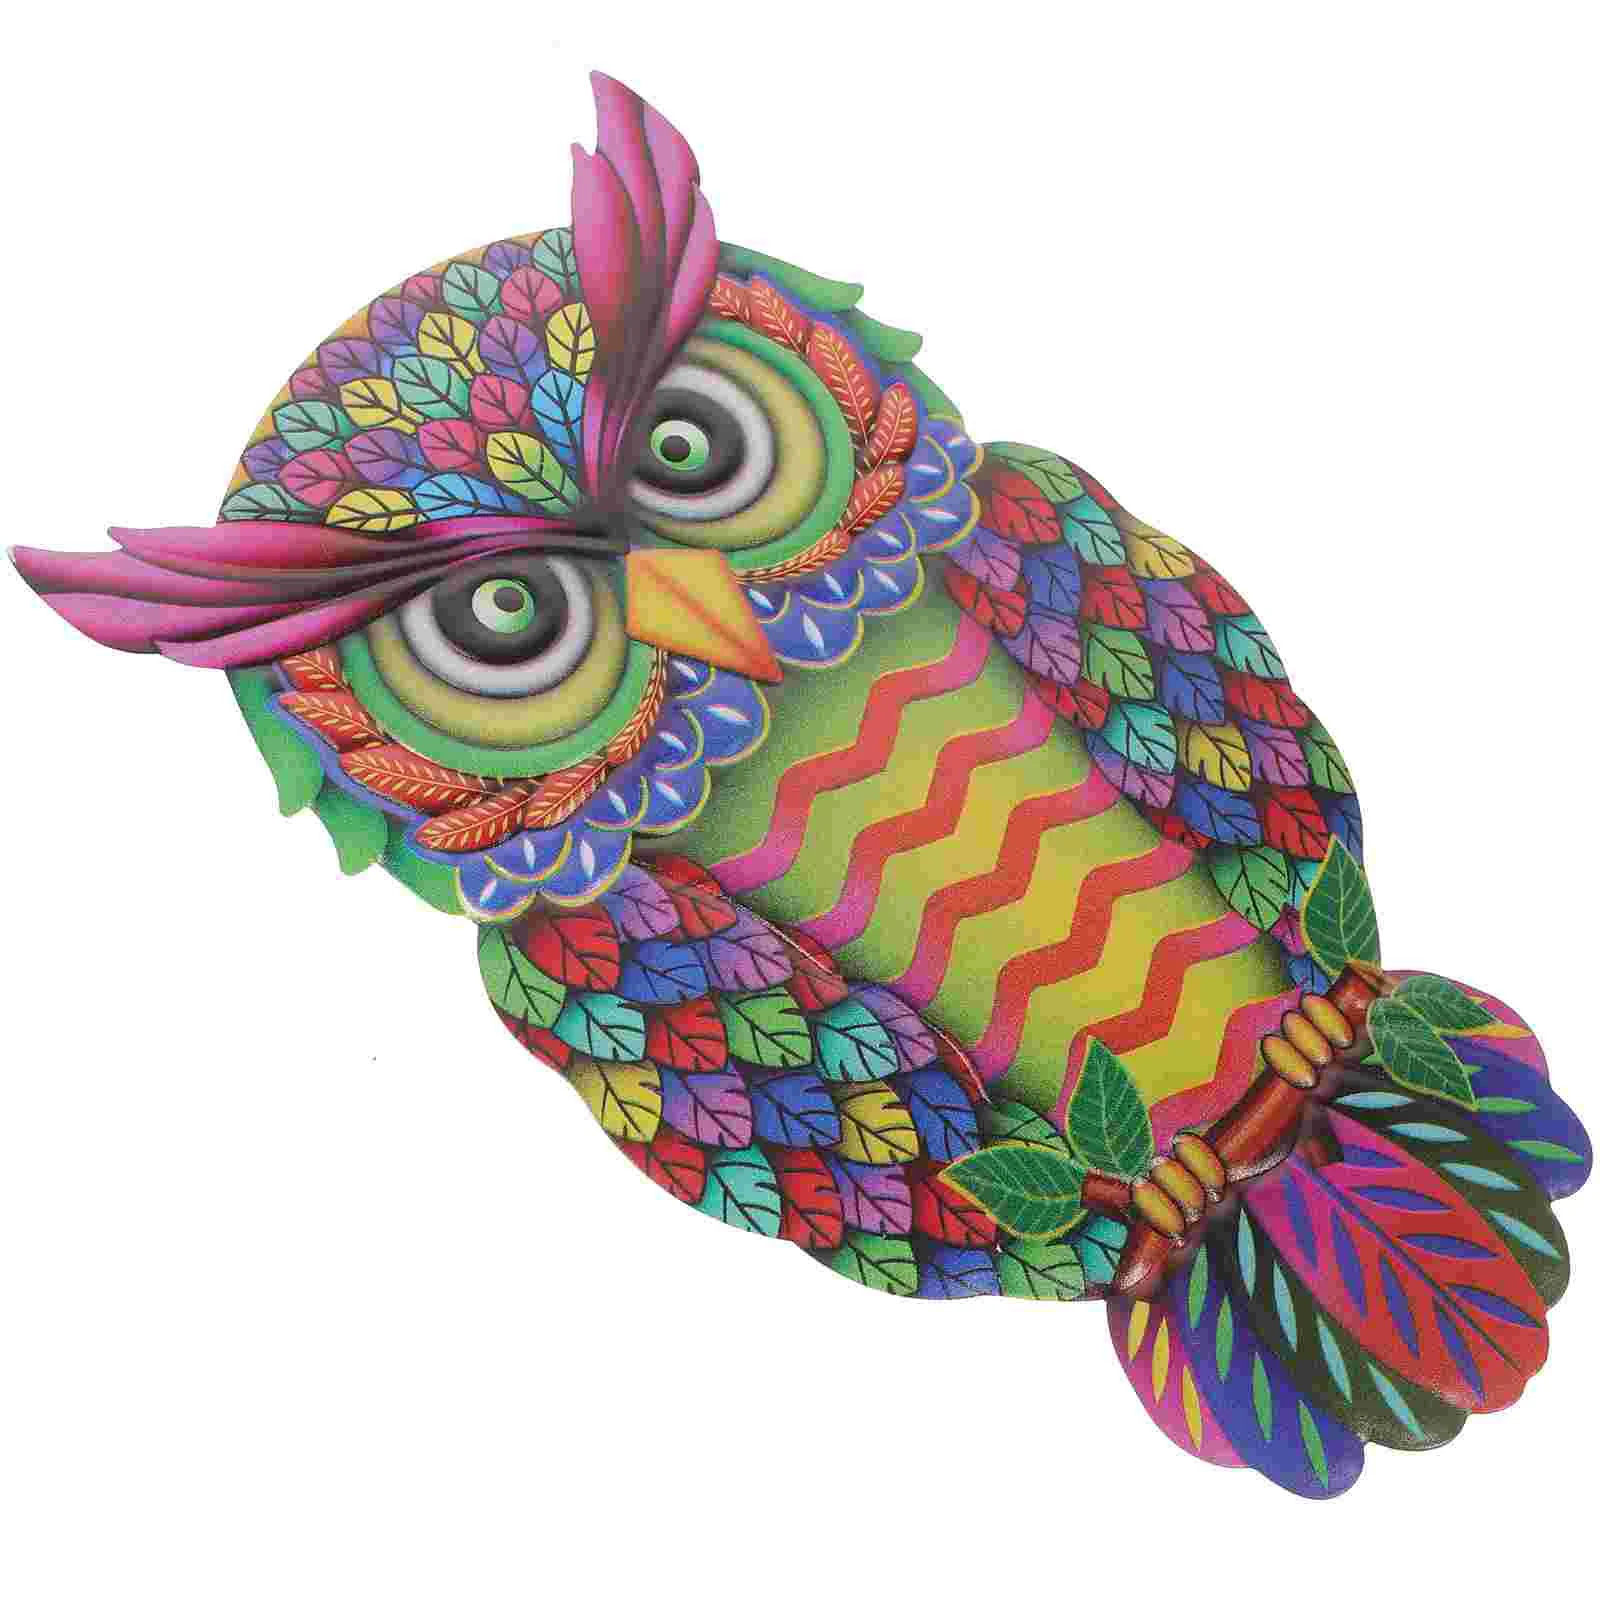 

Outdoor Home Decor Owl Ornament 2 Metal Wall Decoration Decorate Sculpture Crafts Creative Iron Hanging